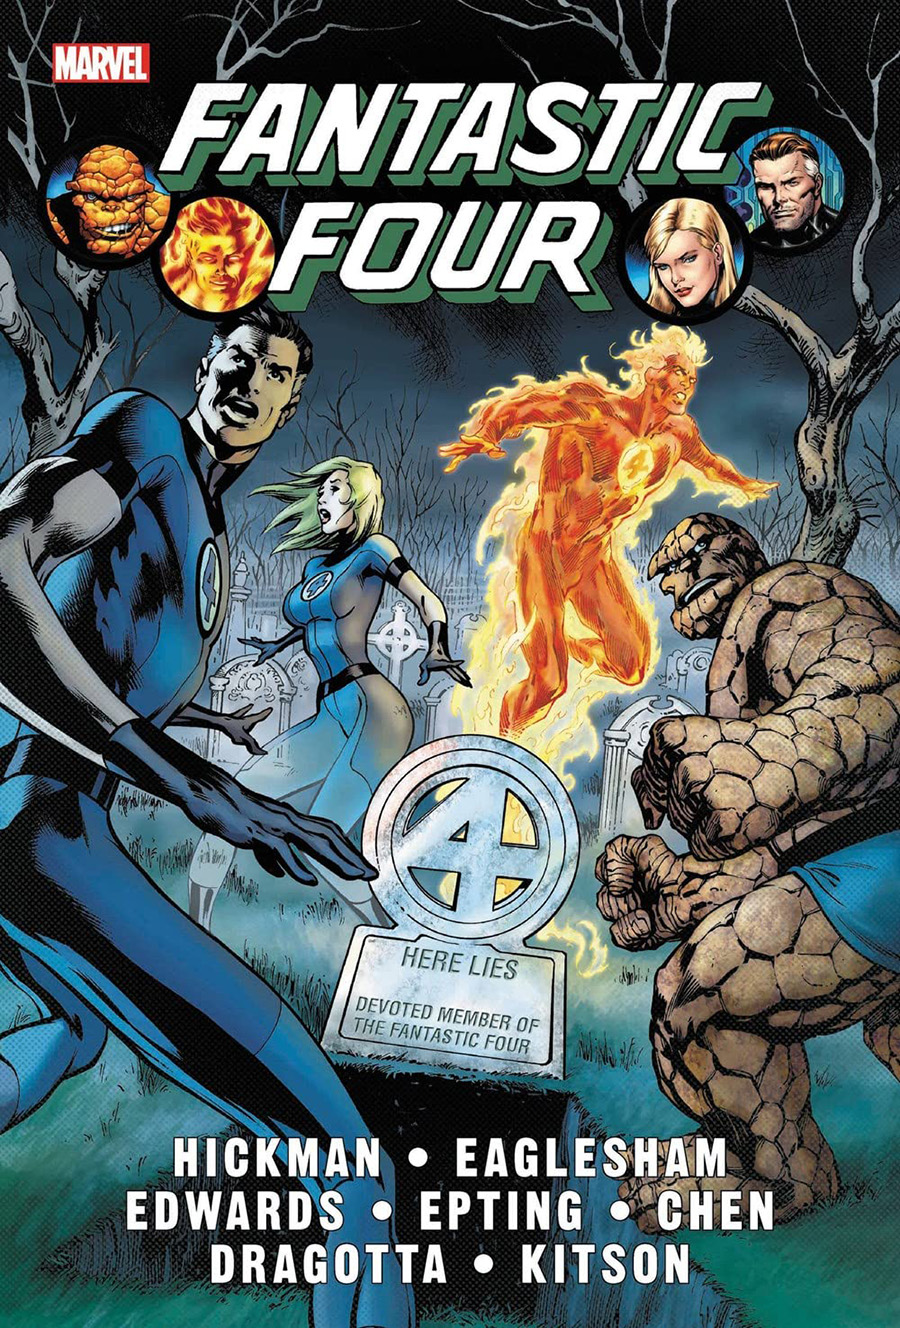 Fantastic Four By Jonathan Hickman Omnibus Vol 1 HC Book Market Alan Davis 1st Issue Cover New Printing